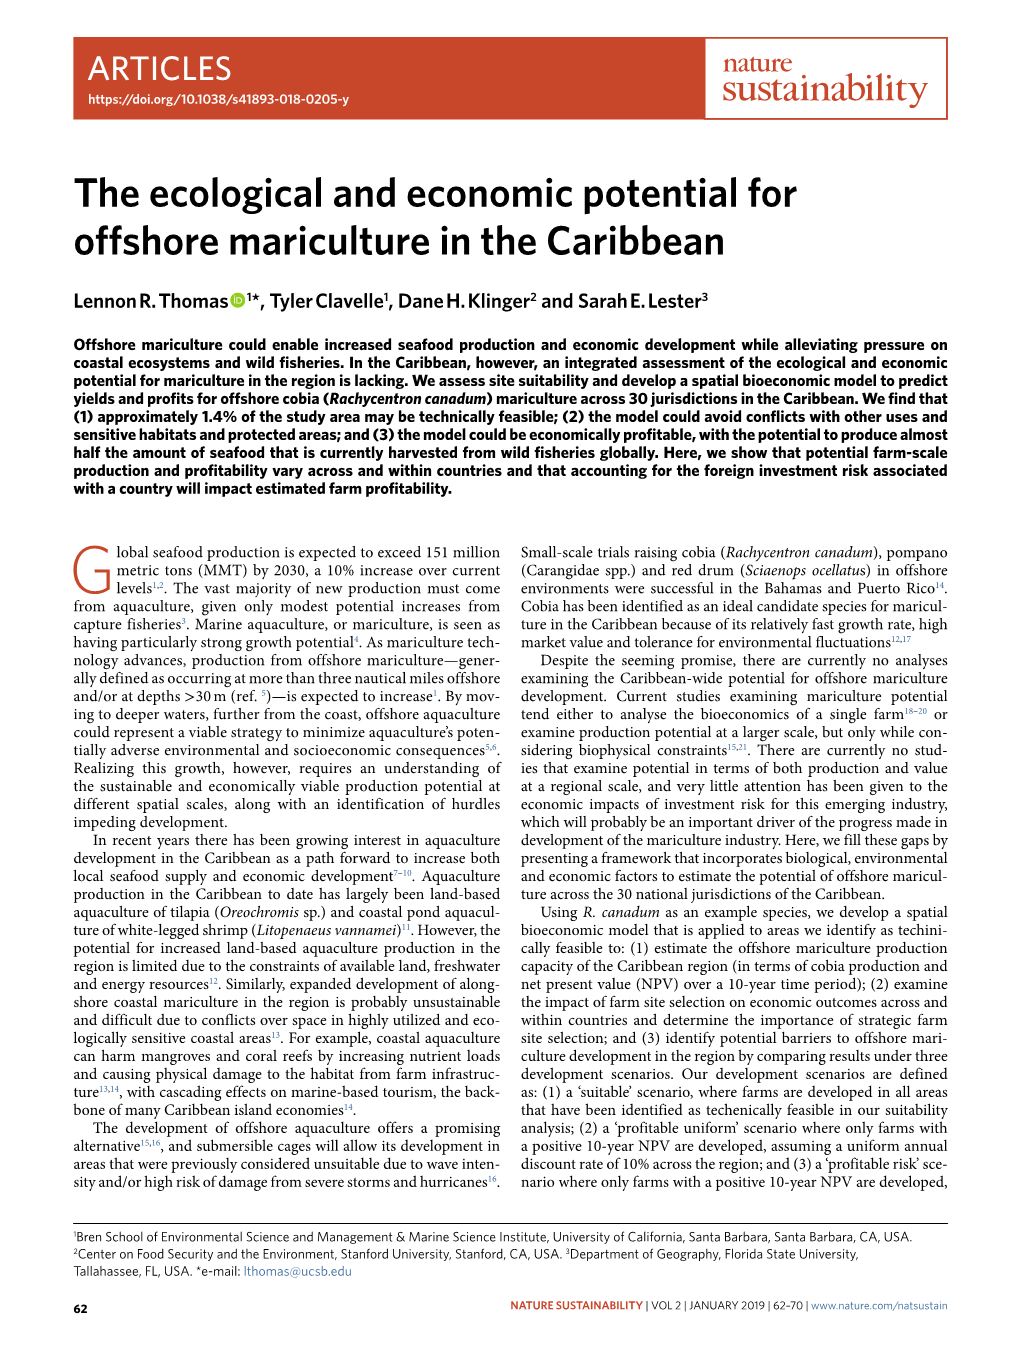 The Ecological and Economic Potential for Offshore Mariculture in the Caribbean